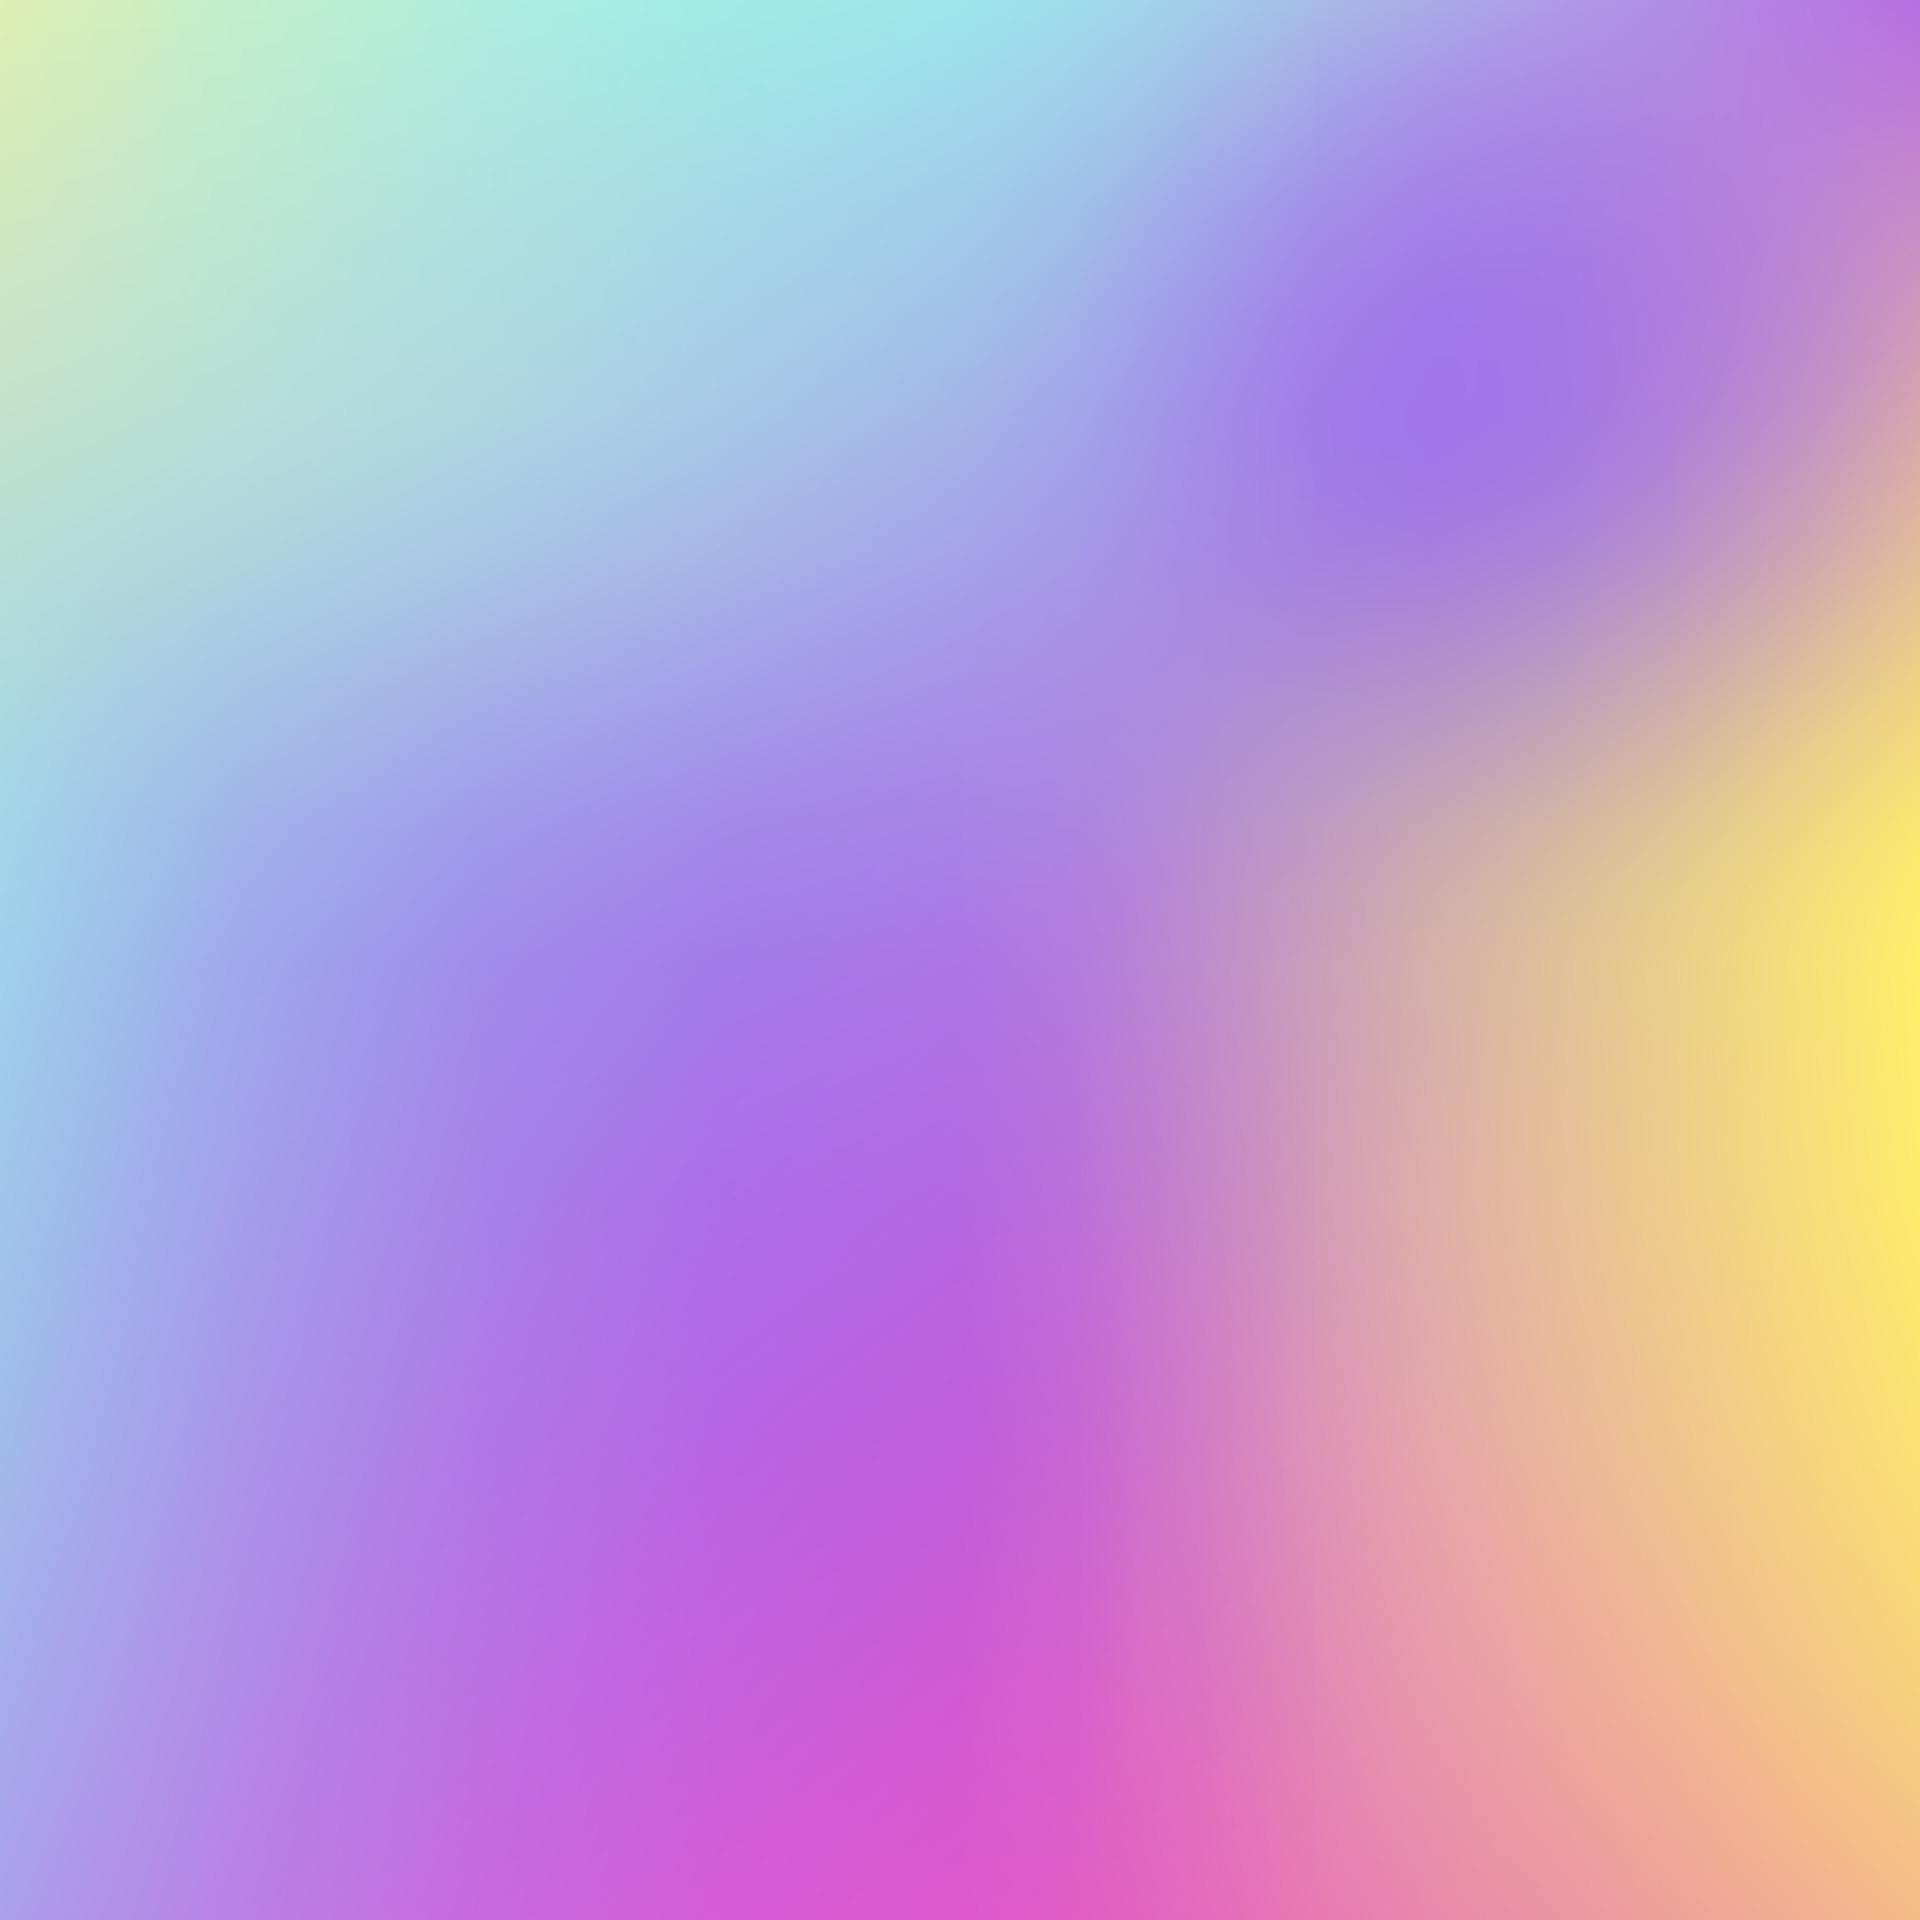 Holographic background, Abstract neon colors, Modern design trends, Creative illustration, 1920x1920 HD Handy